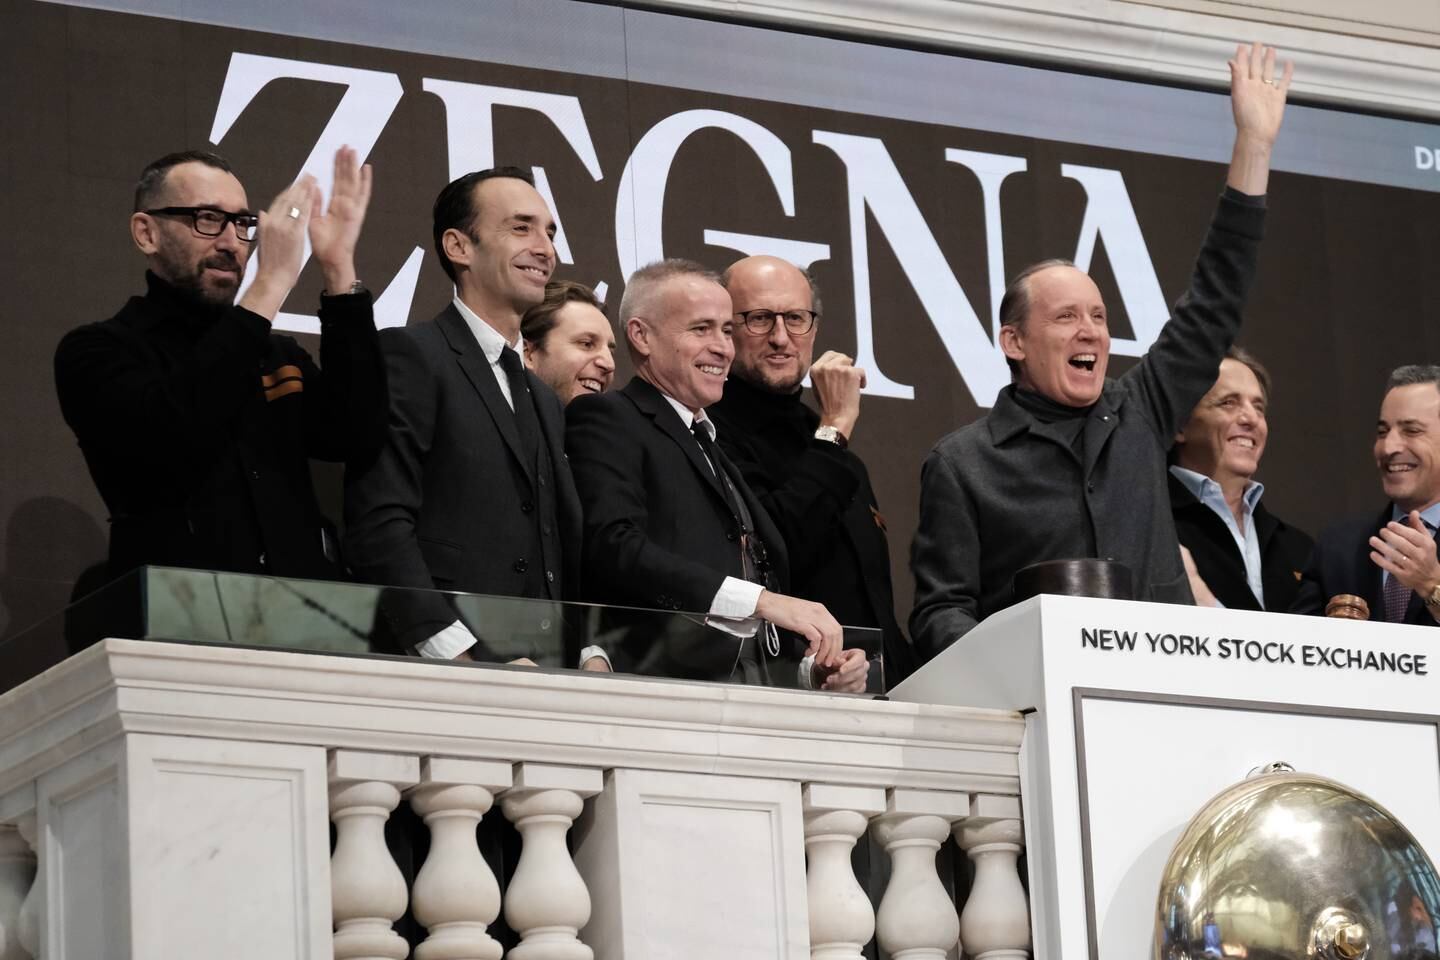 Zegna’s Chief Executive Gildo Zegna (right) rings the Opening Bell of the New York Stock Exchange (NYSE) as the Italian luxury group goes public through a merger with a U.S. special purpose acquisition company (SPAC) in a deal with an enterprise value of $3.1 billion in December 2021.